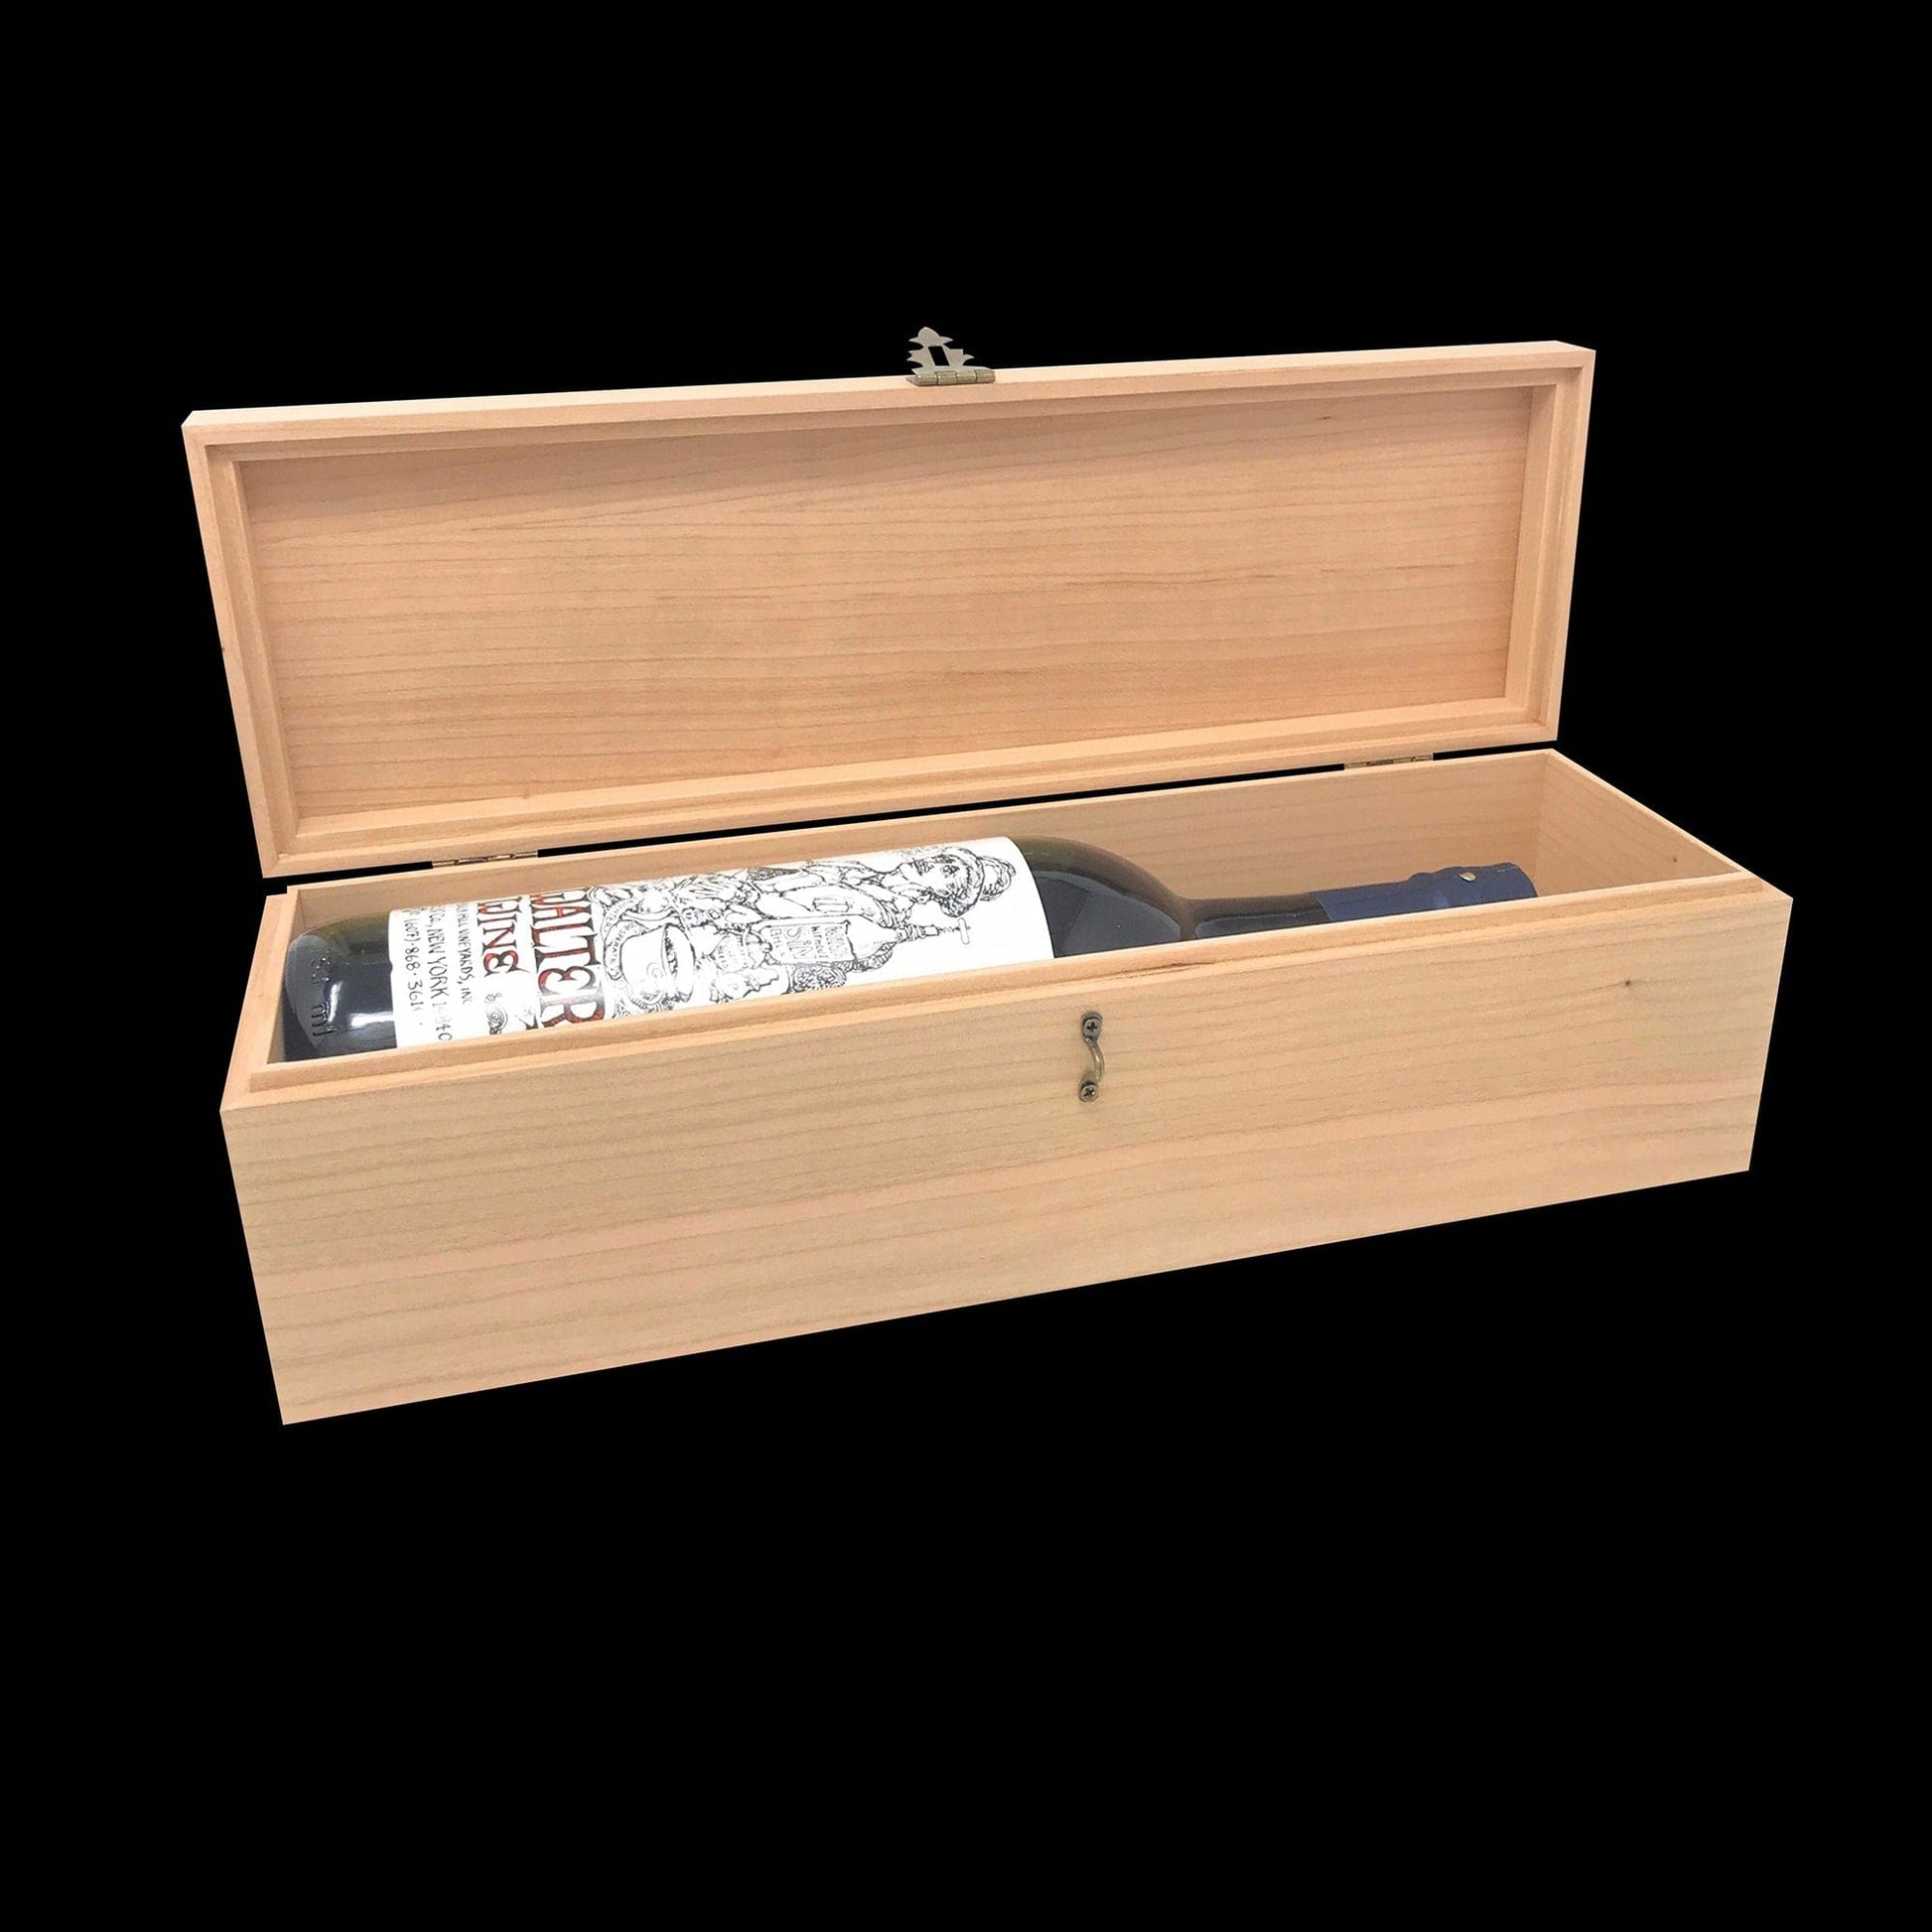 Personalized wooden wine gift box - Laser Engraved - Any celebration g –  streamsidecrafts